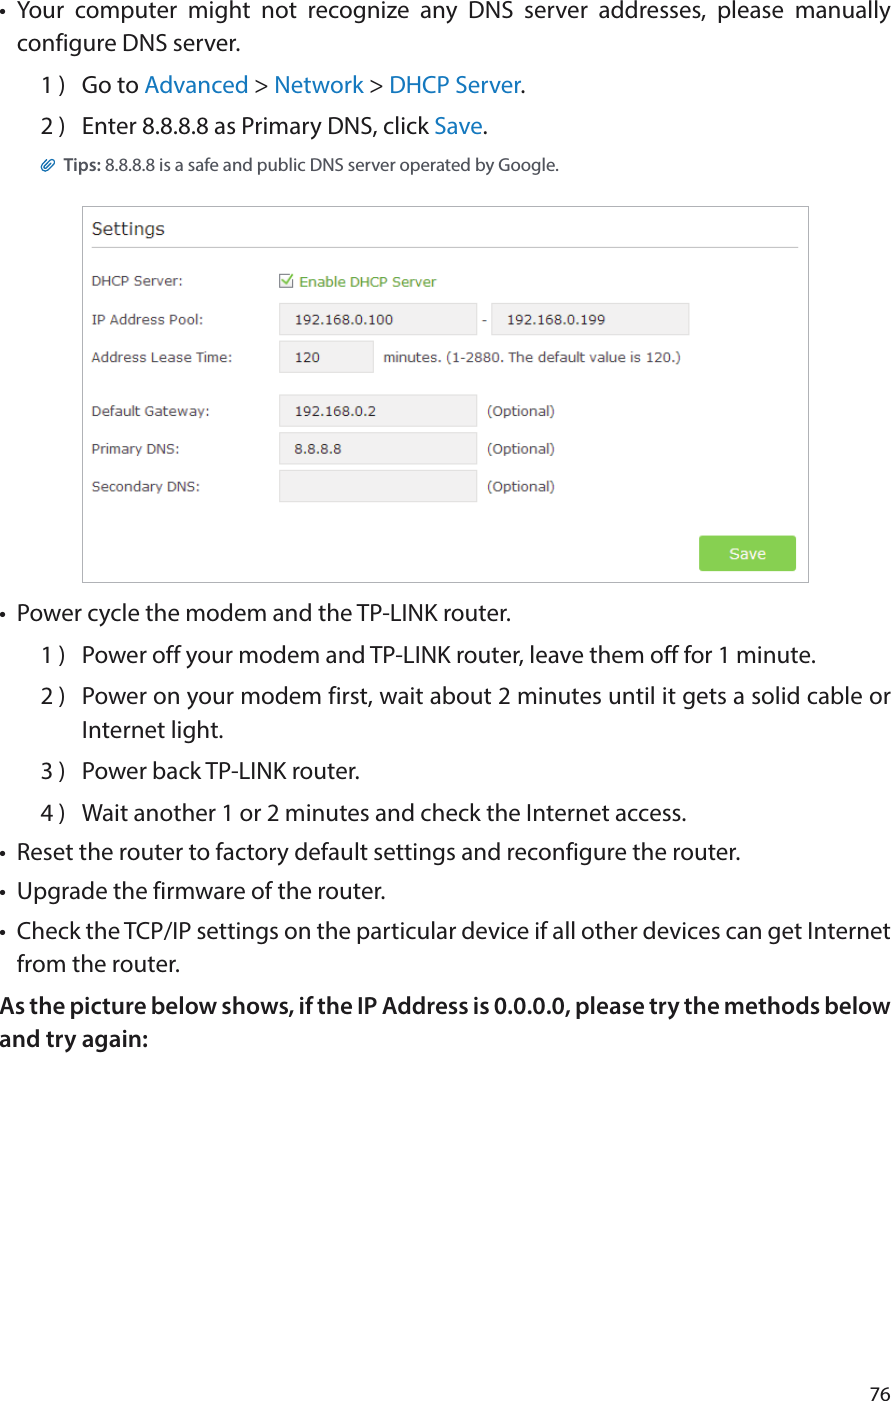 76•  Your computer might not recognize any DNS server addresses, please manually configure DNS server.1 )  Go to Advanced &gt; Network &gt; DHCP Server.2 )  Enter 8.8.8.8 as Primary DNS, click Save. Tips: 8.8.8.8 is a safe and public DNS server operated by Google.•  Power cycle the modem and the TP-LINK router.1 )  Power off your modem and TP-LINK router, leave them off for 1 minute.2 )  Power on your modem first, wait about 2 minutes until it gets a solid cable or Internet light.3 )  Power back TP-LINK router.4 )  Wait another 1 or 2 minutes and check the Internet access.•  Reset the router to factory default settings and reconfigure the router.•  Upgrade the firmware of the router.•  Check the TCP/IP settings on the particular device if all other devices can get Internet from the router.As the picture below shows, if the IP Address is 0.0.0.0, please try the methods below and try again: